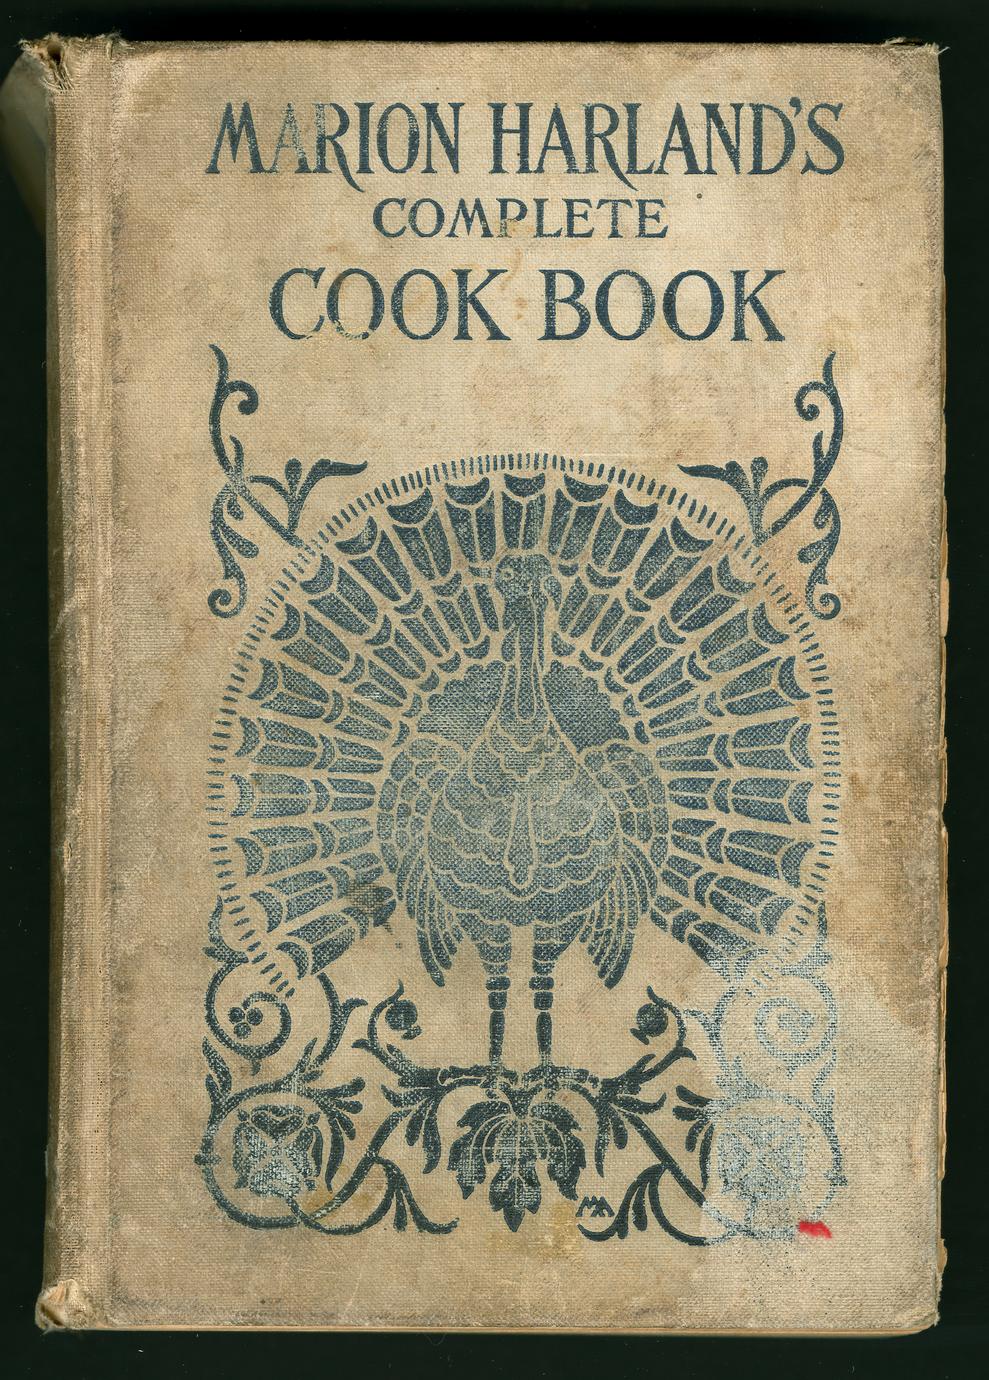 Marion Harland's complete cook book (1 of 2)